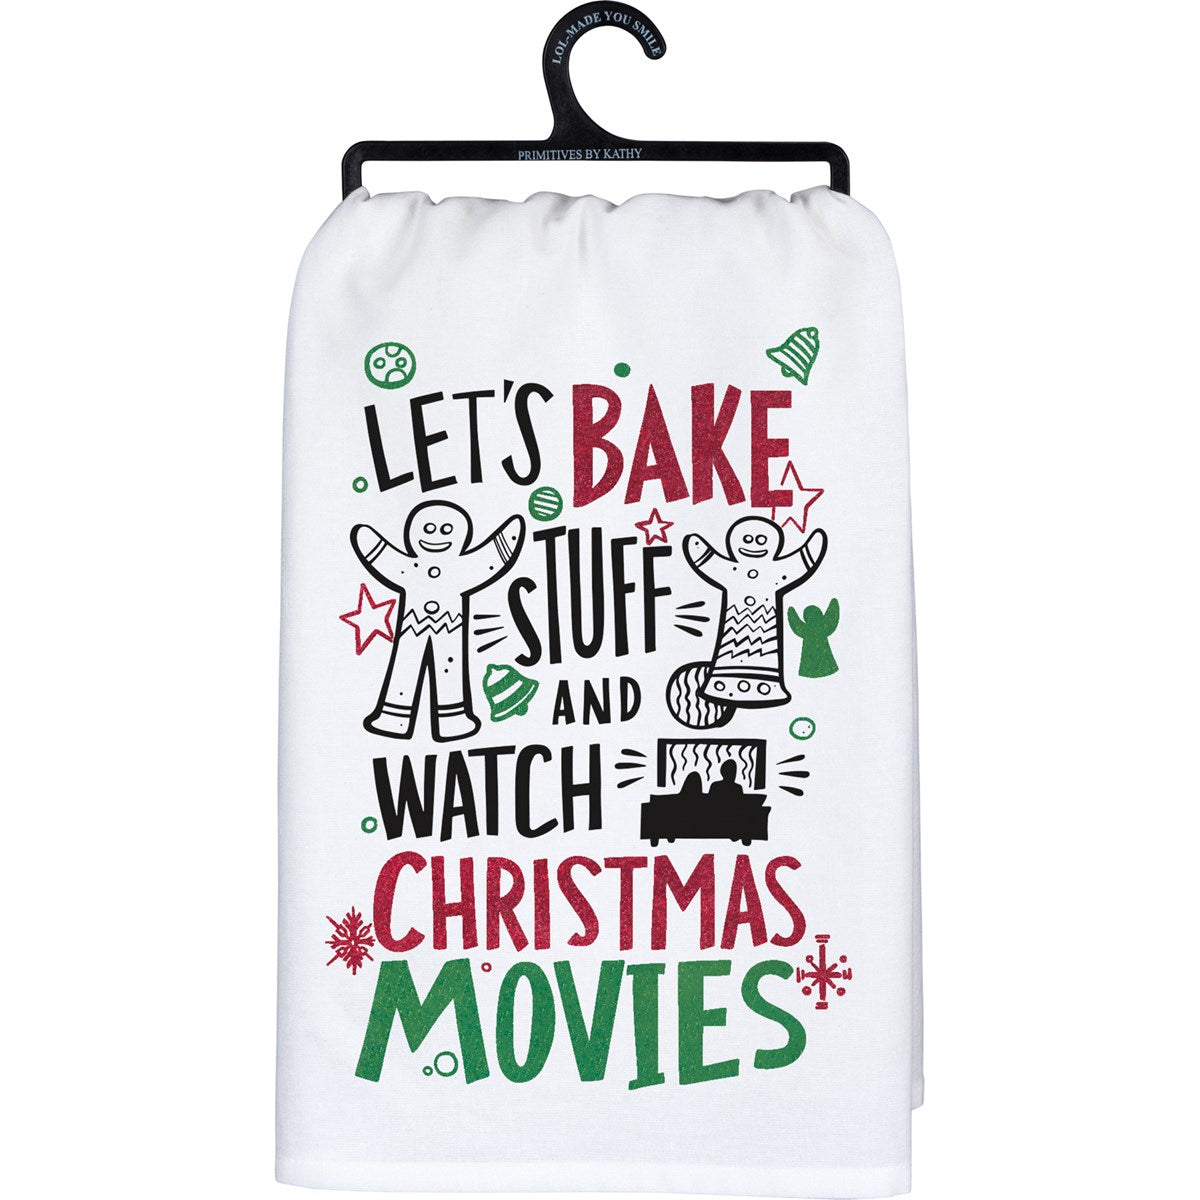 Let's Bake Stuff And Watch Christmas Movies Kitchen Towel